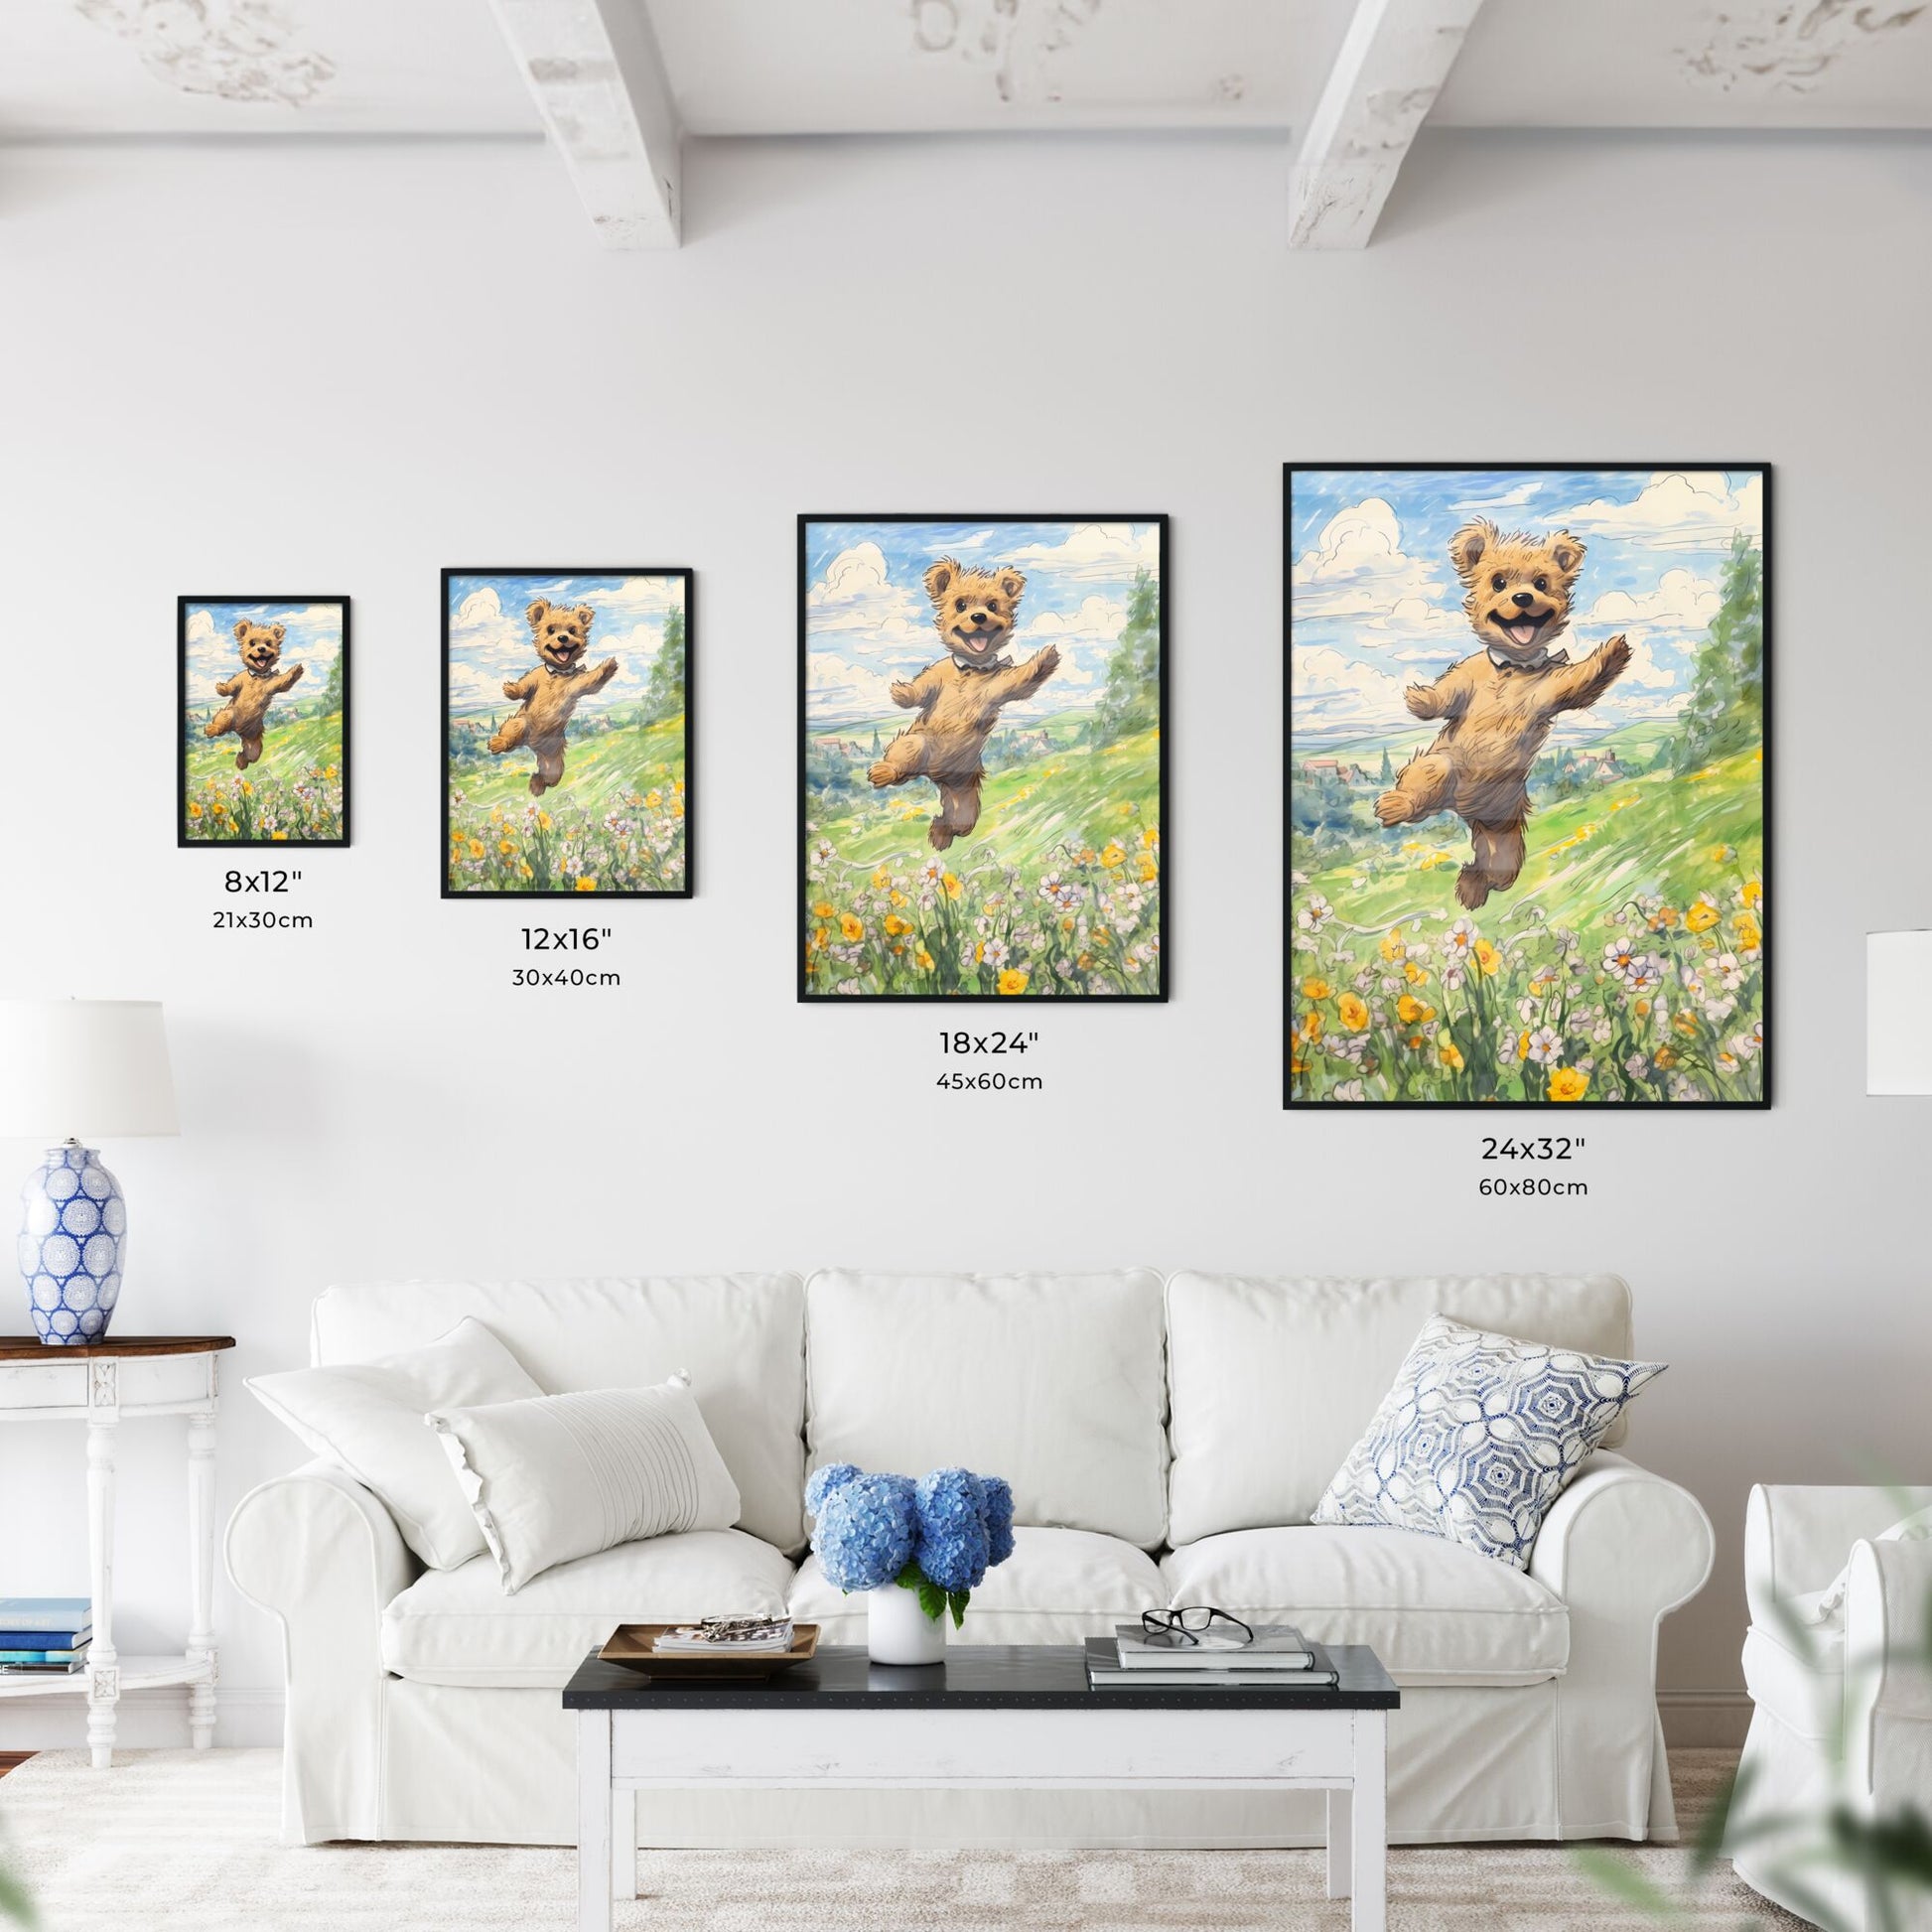 A Poster of funny dog jumping - A Cartoon Of A Dog Jumping In The Air Default Title